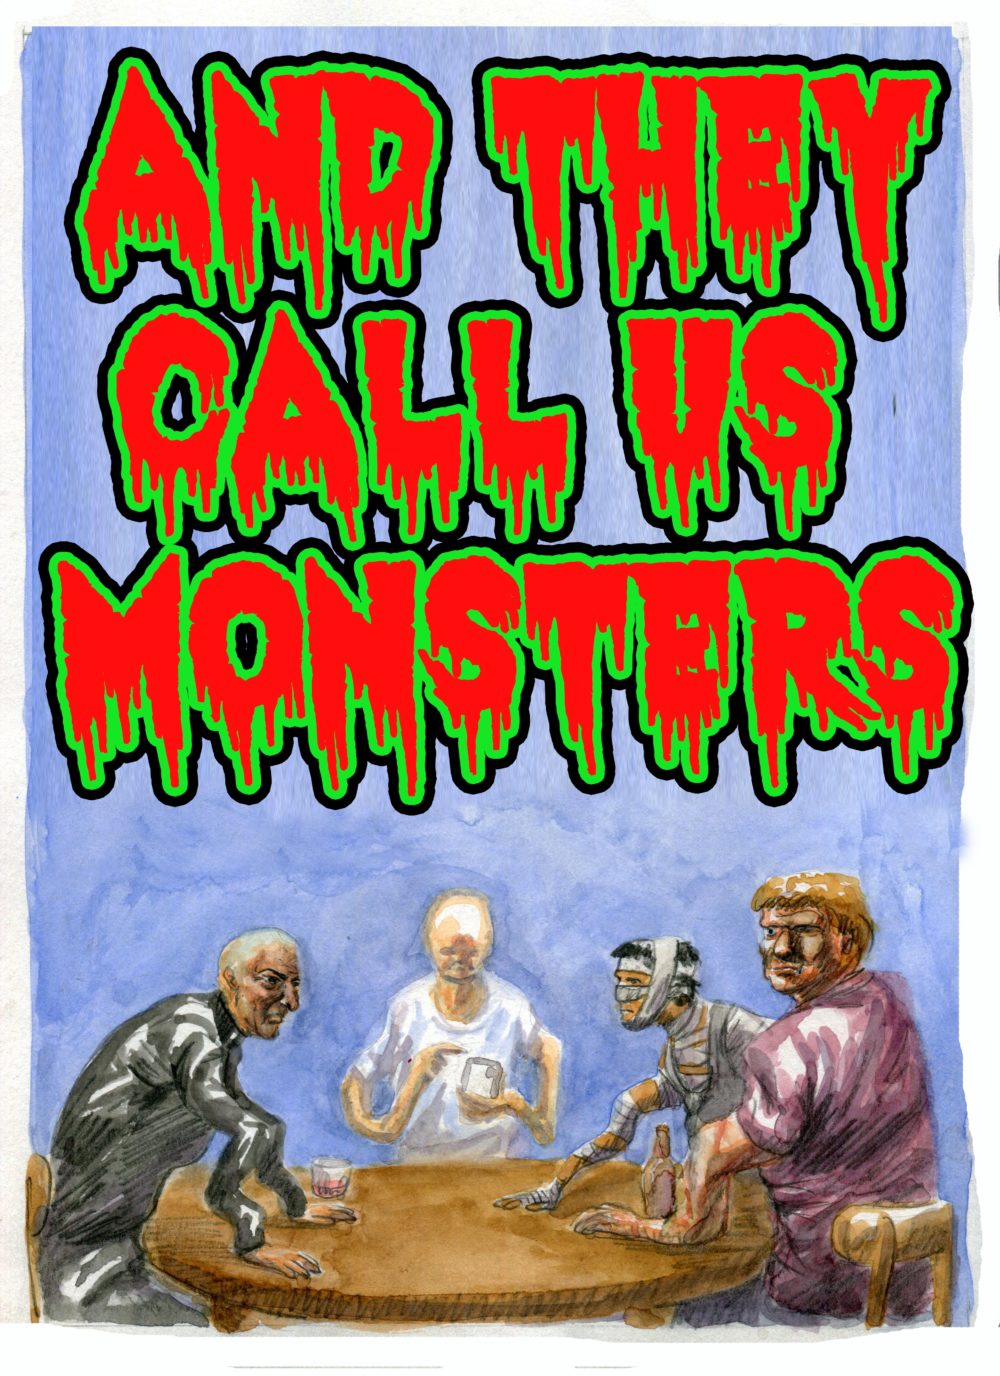 And They Call Us MONSTERS’s Cover is here